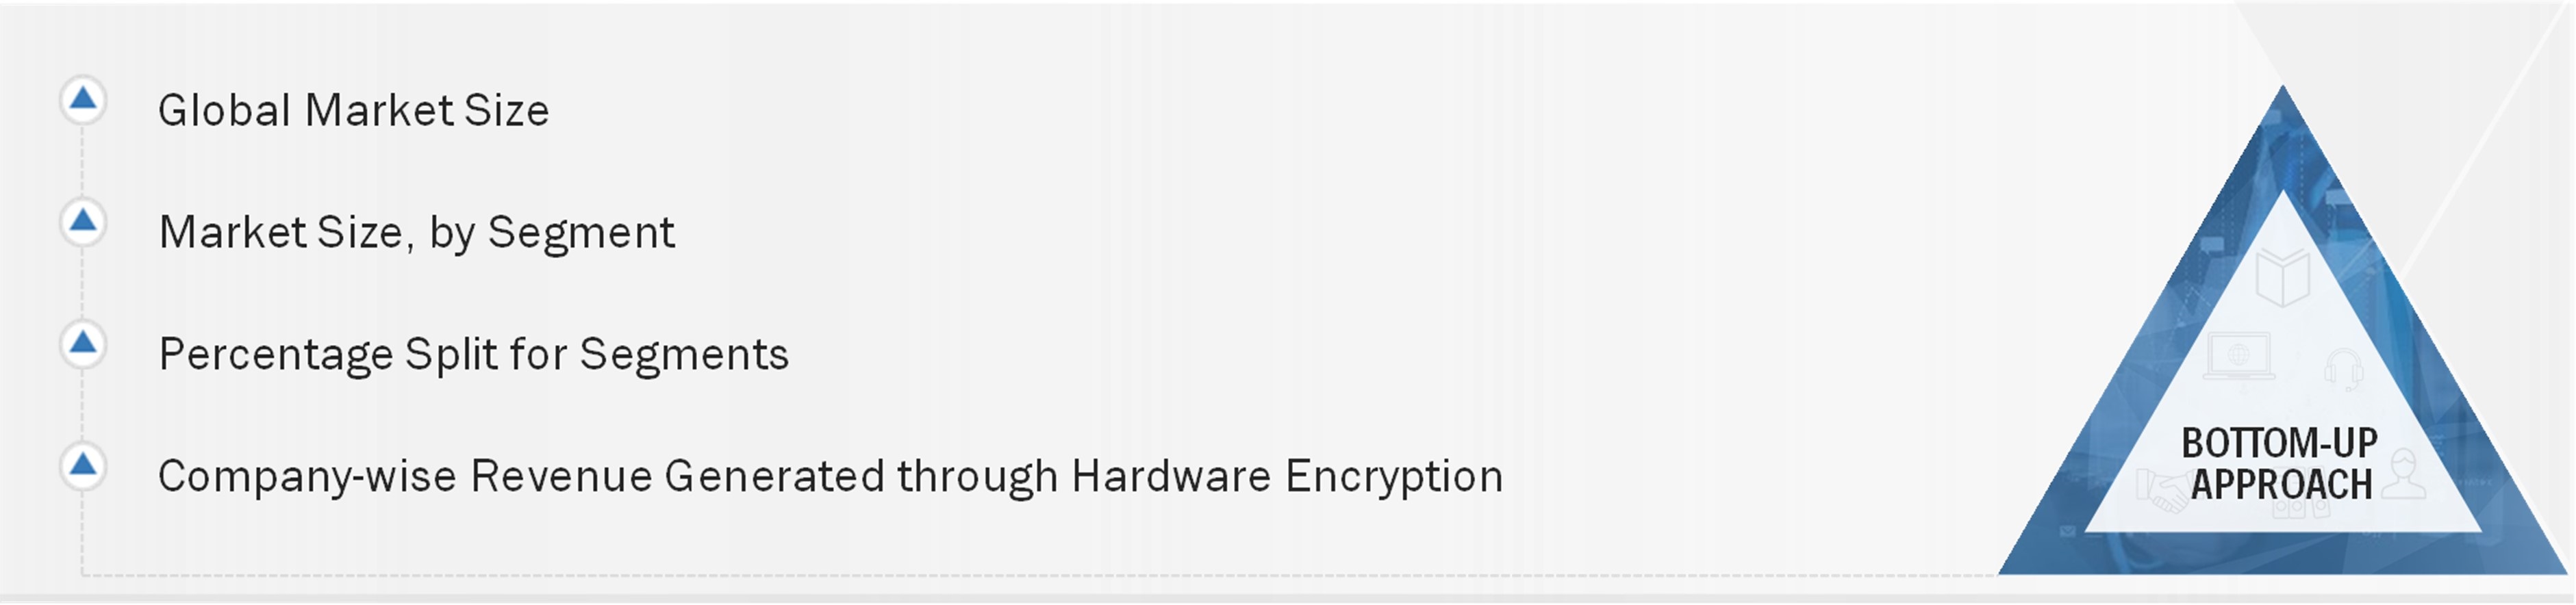 Hardware Encryption Market Size, and Bottom-Up Approach 